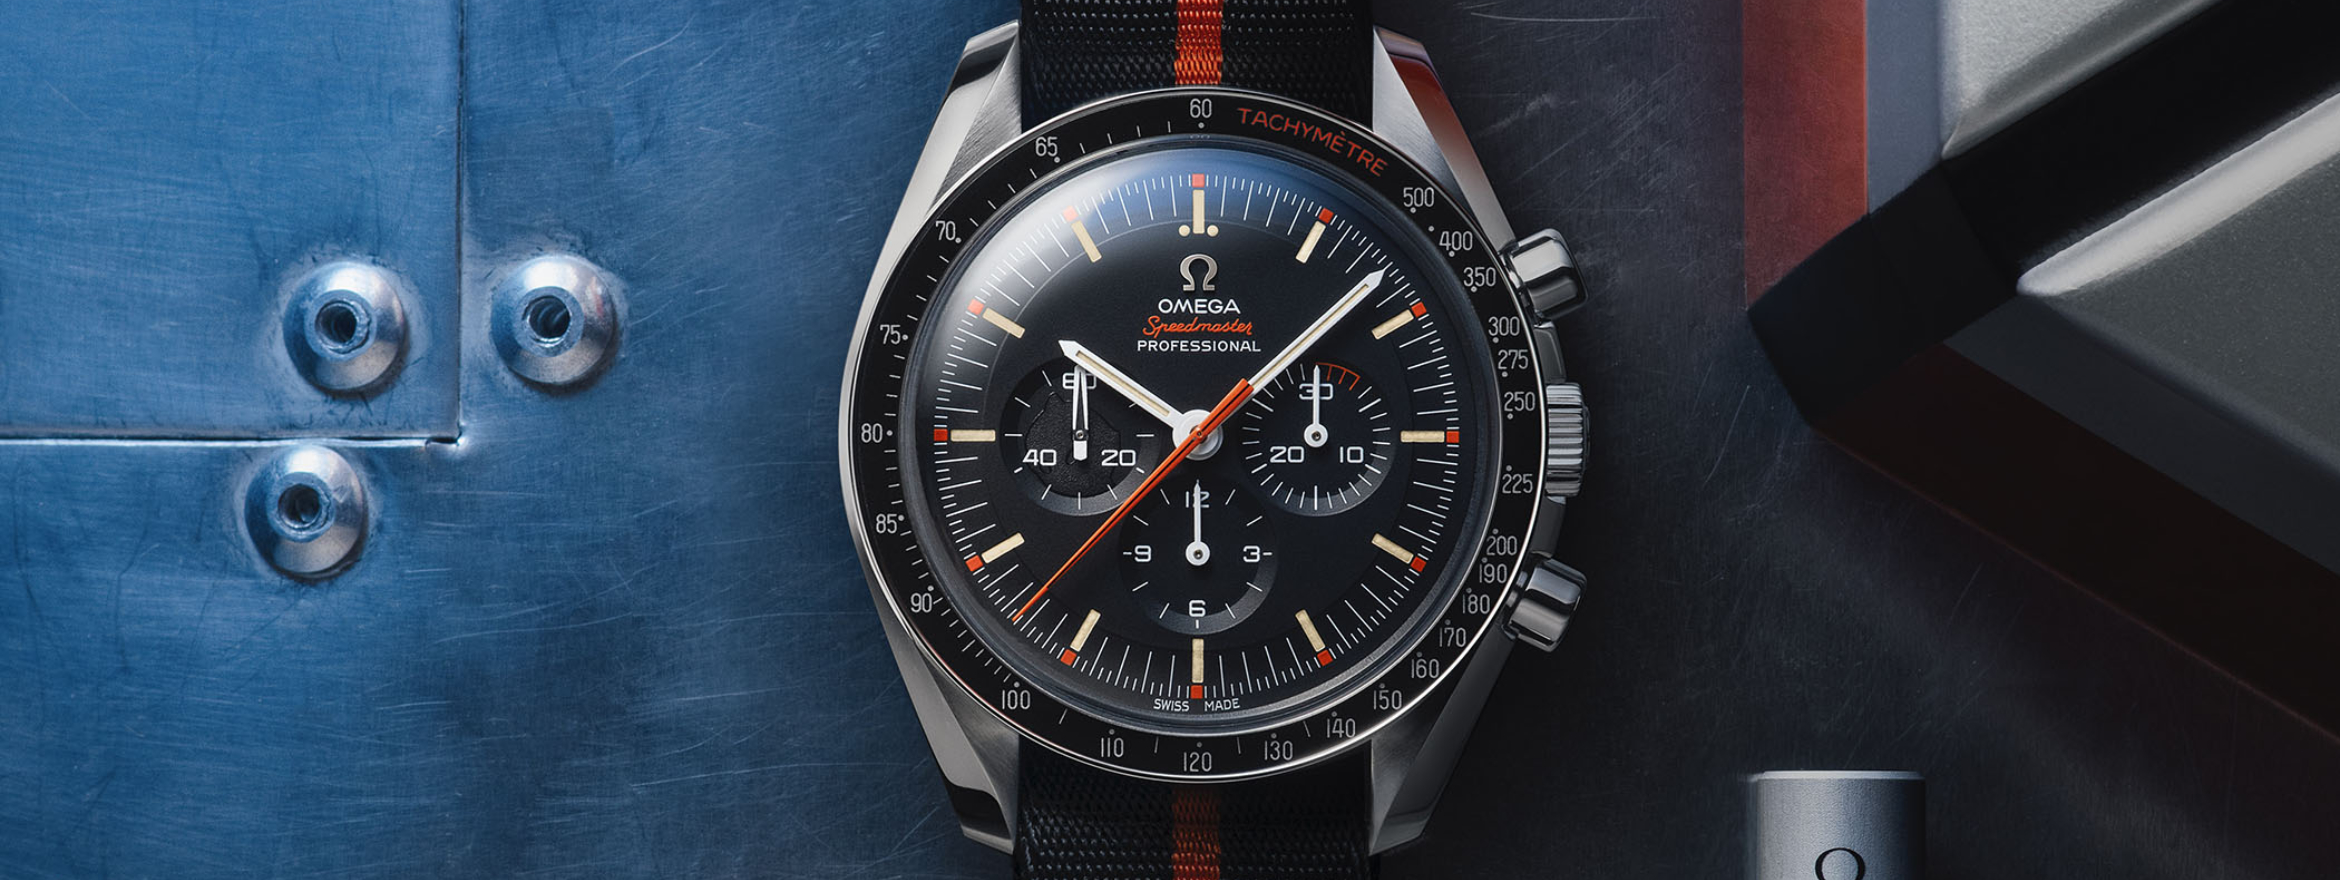 Omega Limited Edition Speedy Tuesday “Ultraman” fully allocated within 2 hours